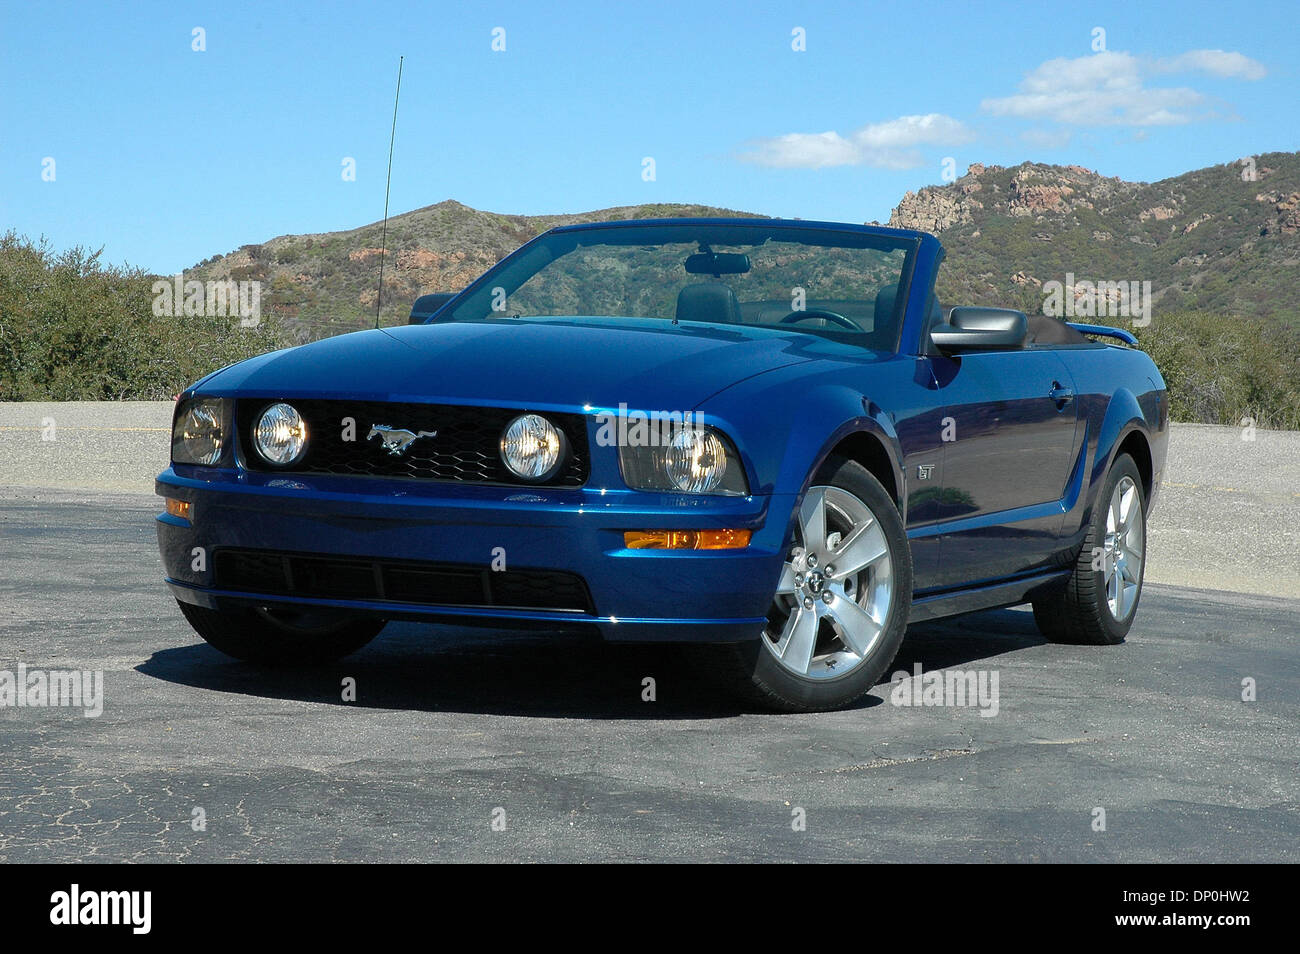 Mar 21, 2006; Los Angeles, CA, USA; The all-new Ford Mustang GT convertible with its exciting retro-modern styling cues taken from the 1967 Mustang GT and economical base price. It boasts a new, more powerful 300hp, 4.6 liter, all-aluminum V8 engine sitting inside the GT model. This more refined V8 engine is mated to a rugged Tremec T3650 5-speed manual, or the new optional 5-speed Stock Photo